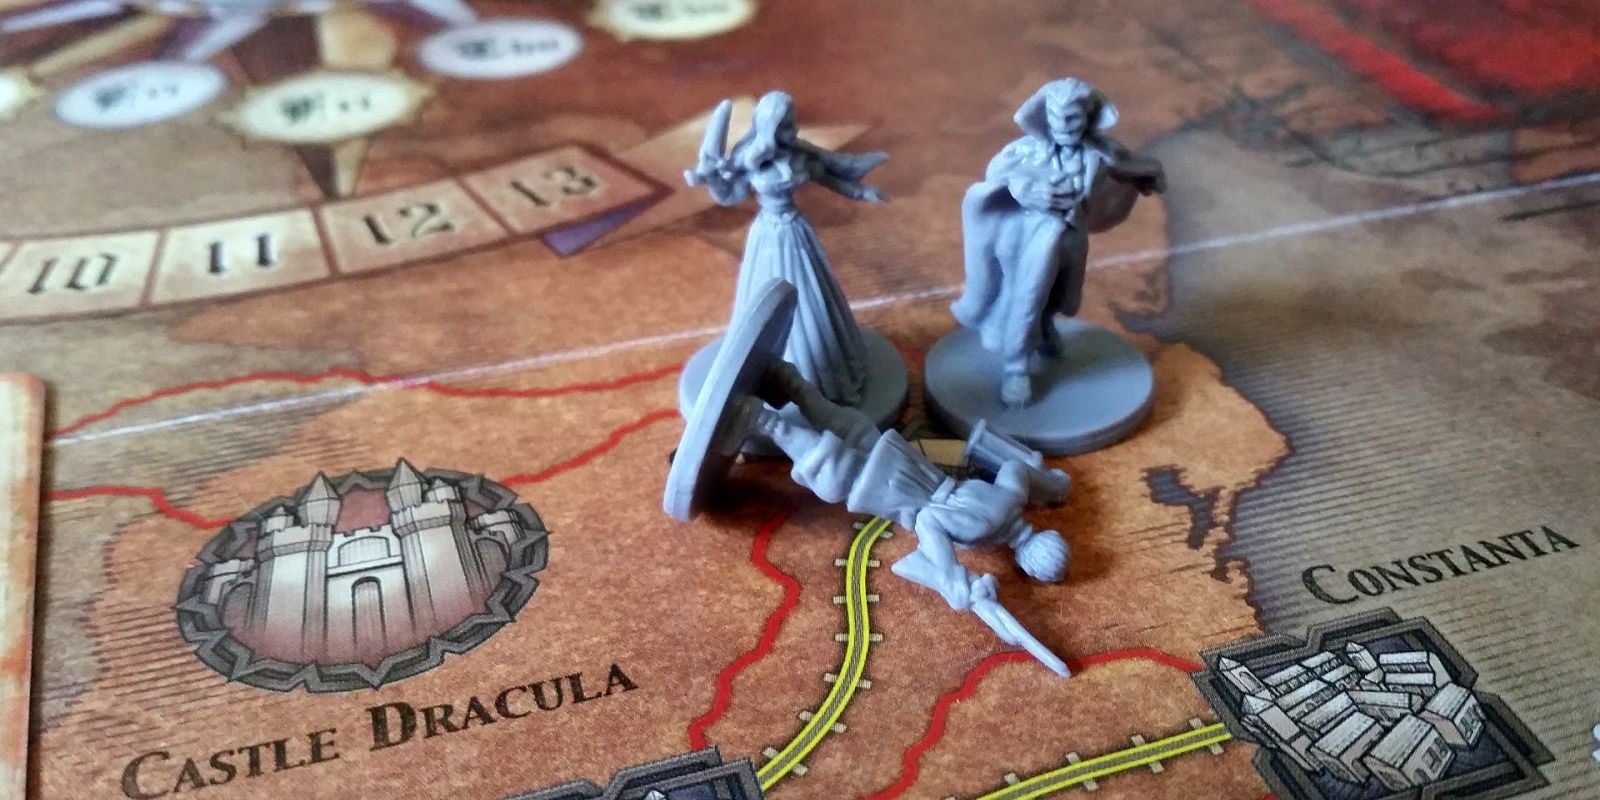 Fury of Dracula Board Game Being Played On The Table